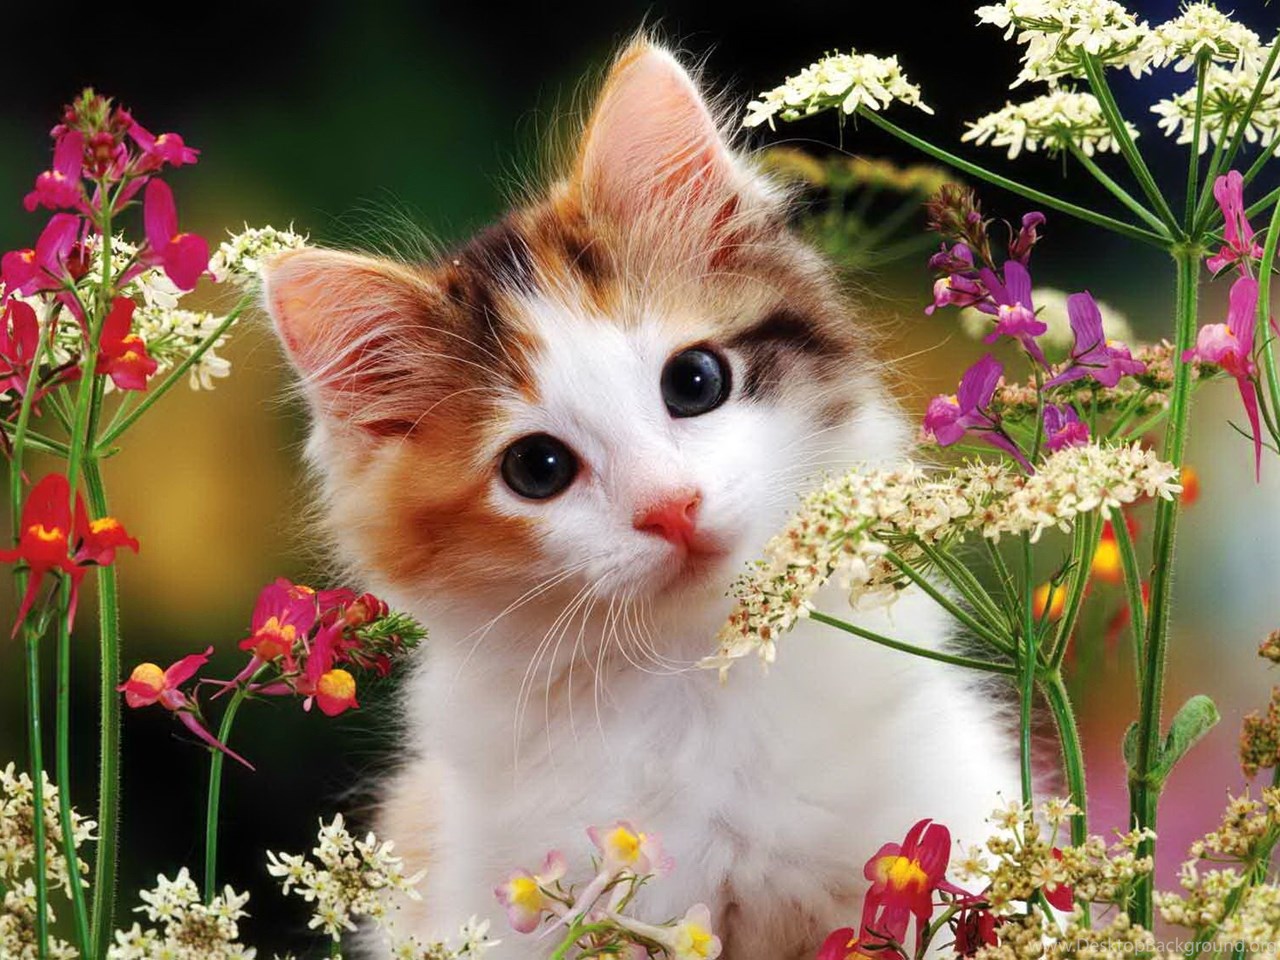 Cats: Flowery Kitty Fluffy Cute Sweet Floral Flowers Adorable Cat. Desktop Background